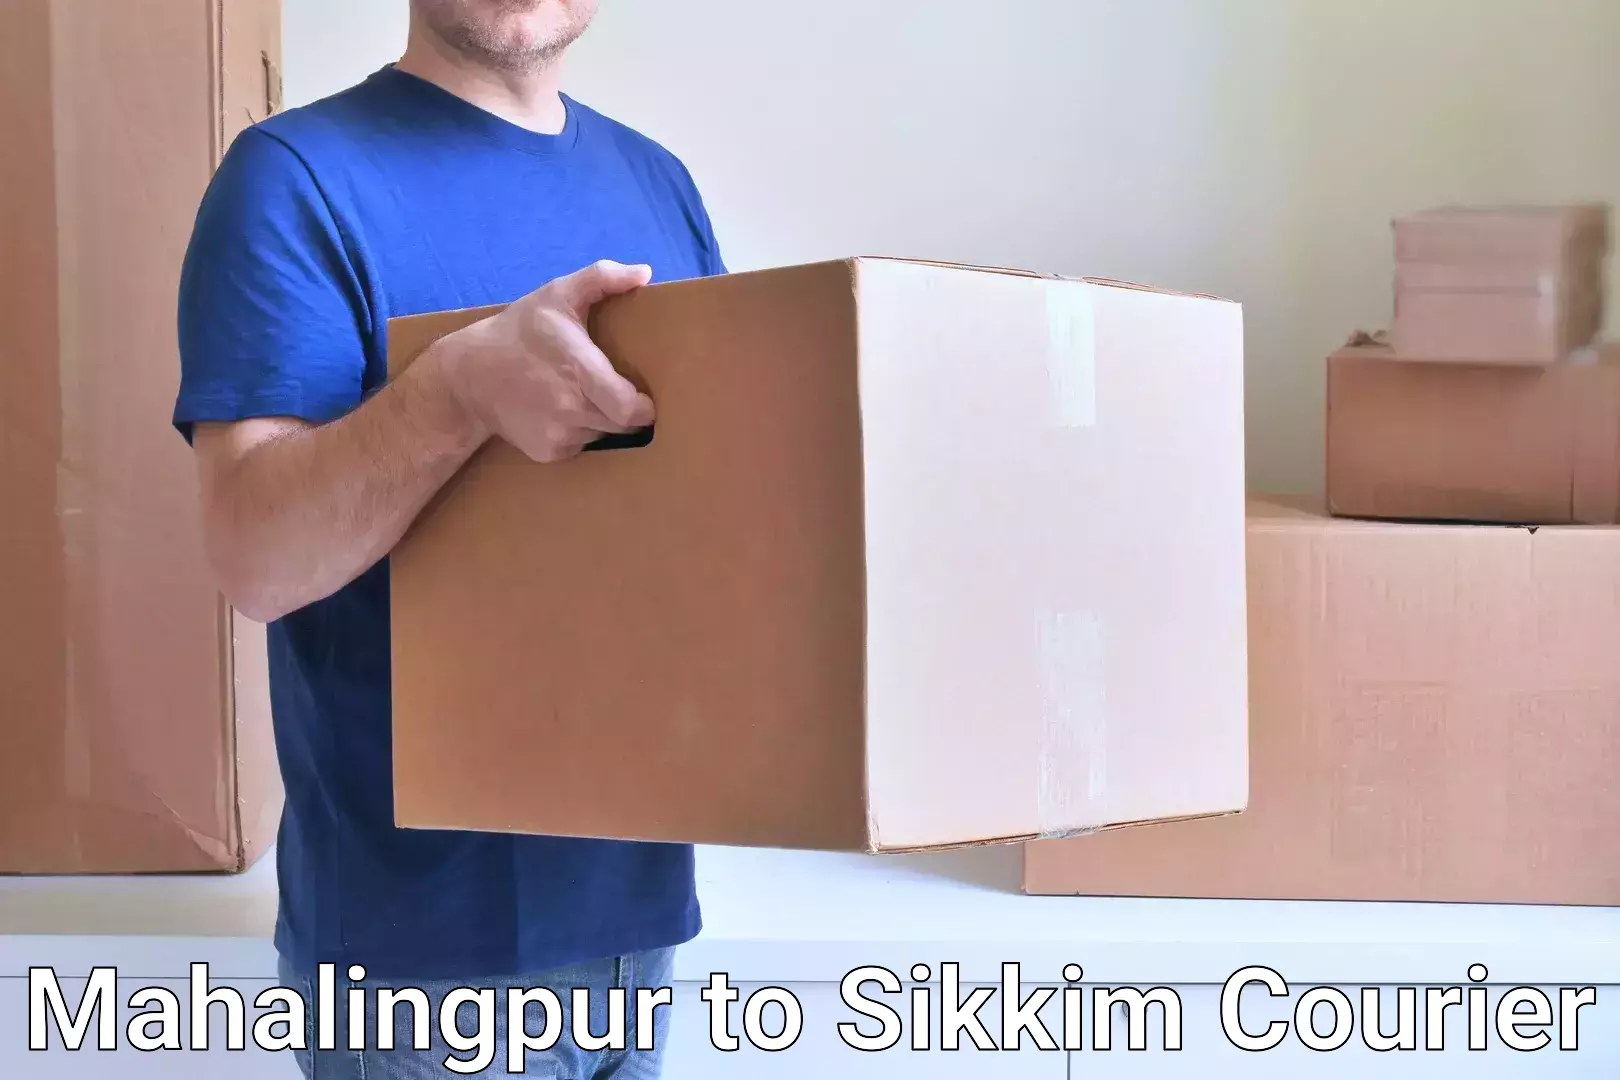 State-of-the-art courier technology Mahalingpur to North Sikkim